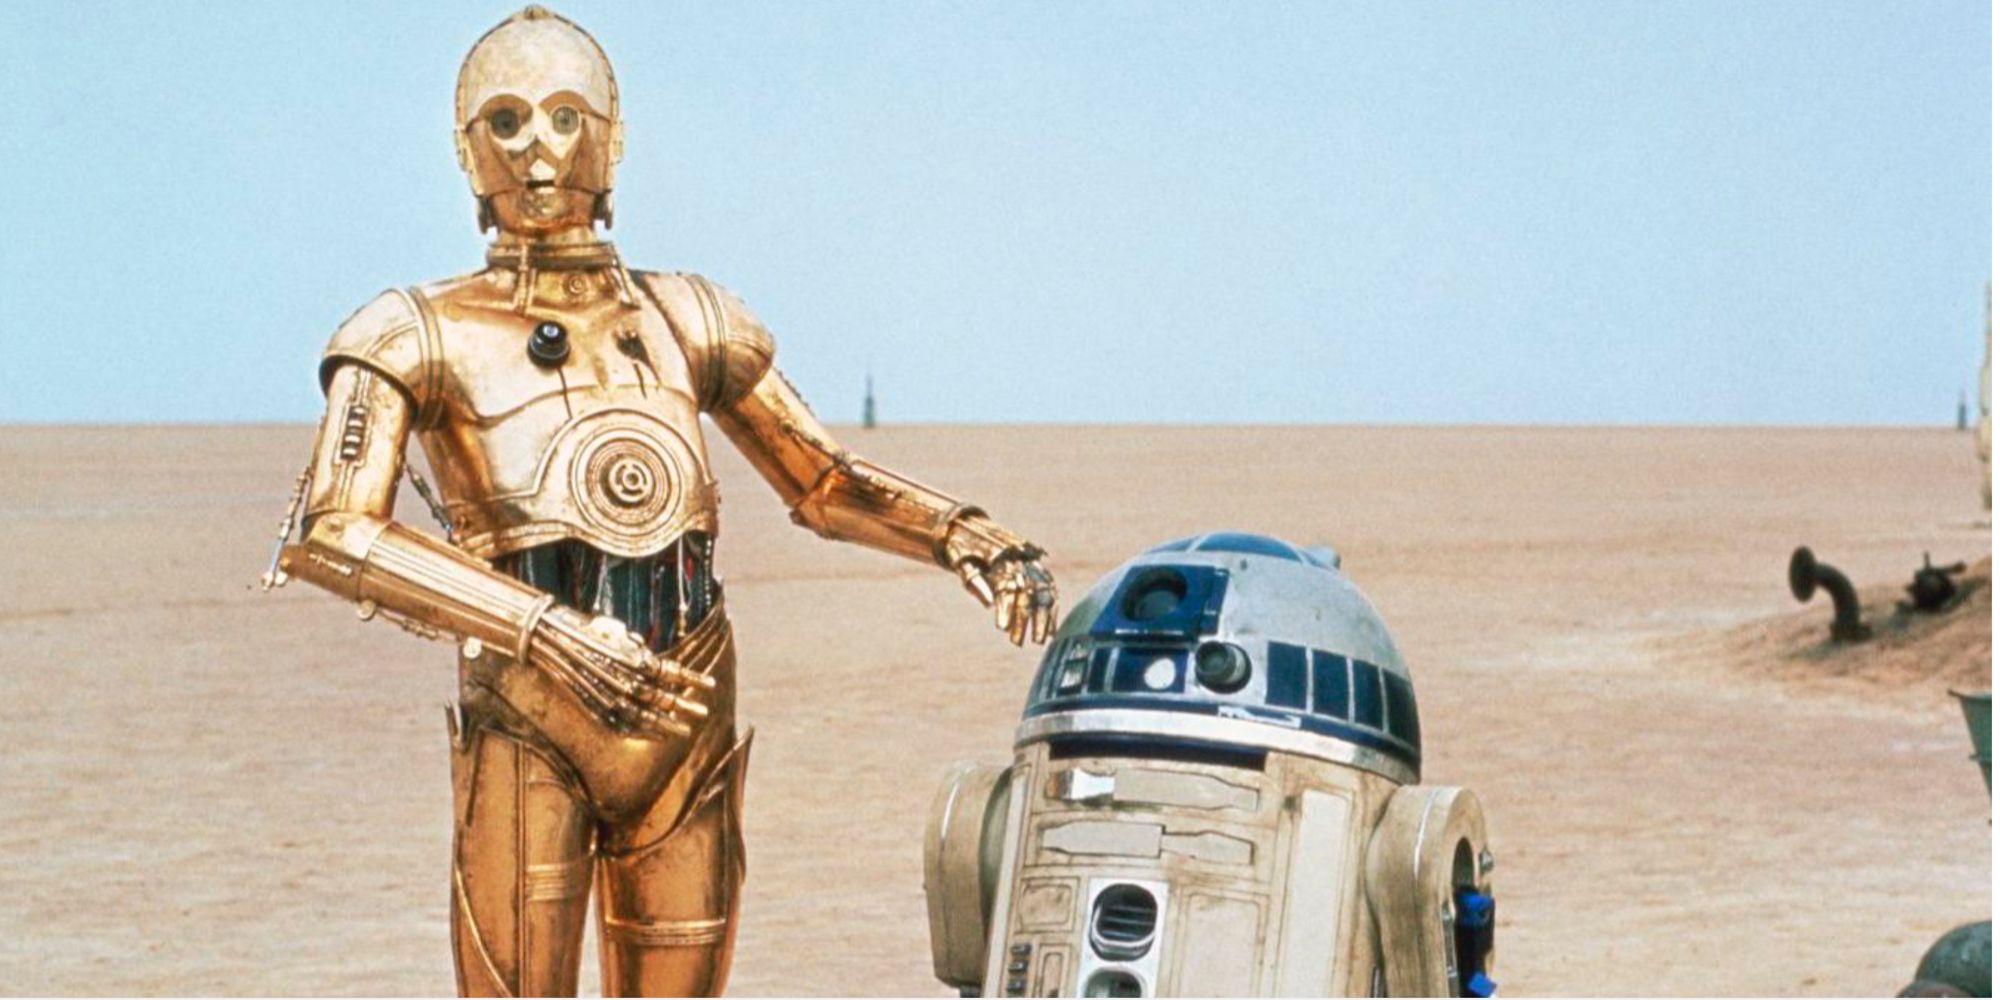 C3P0 & R2D2 from Star Wars